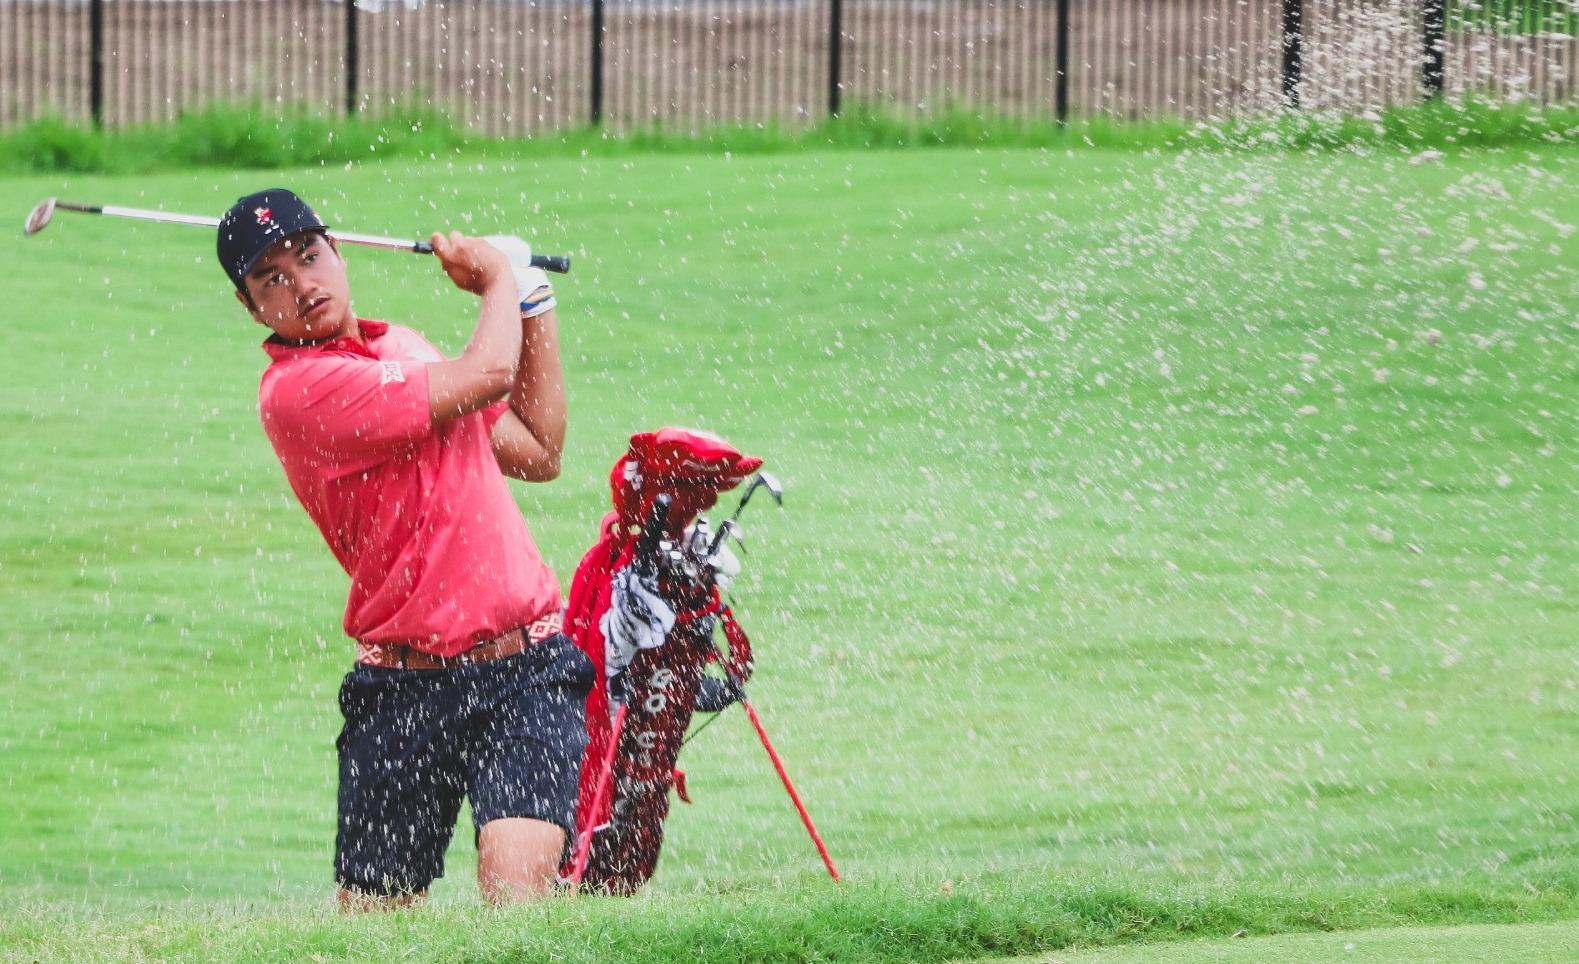 University of Houston Men’s Golf Tied for Third Place in NCAA Baton Rouge Regional Tournament